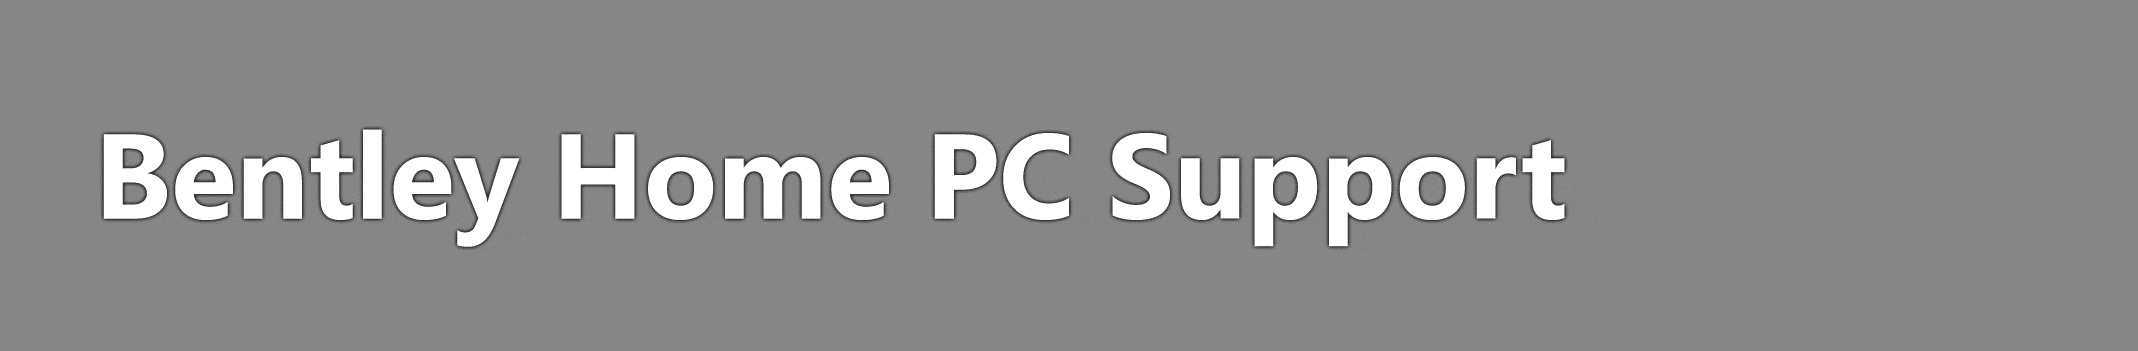 Bentley Home PC Support - Articles - Windows 11